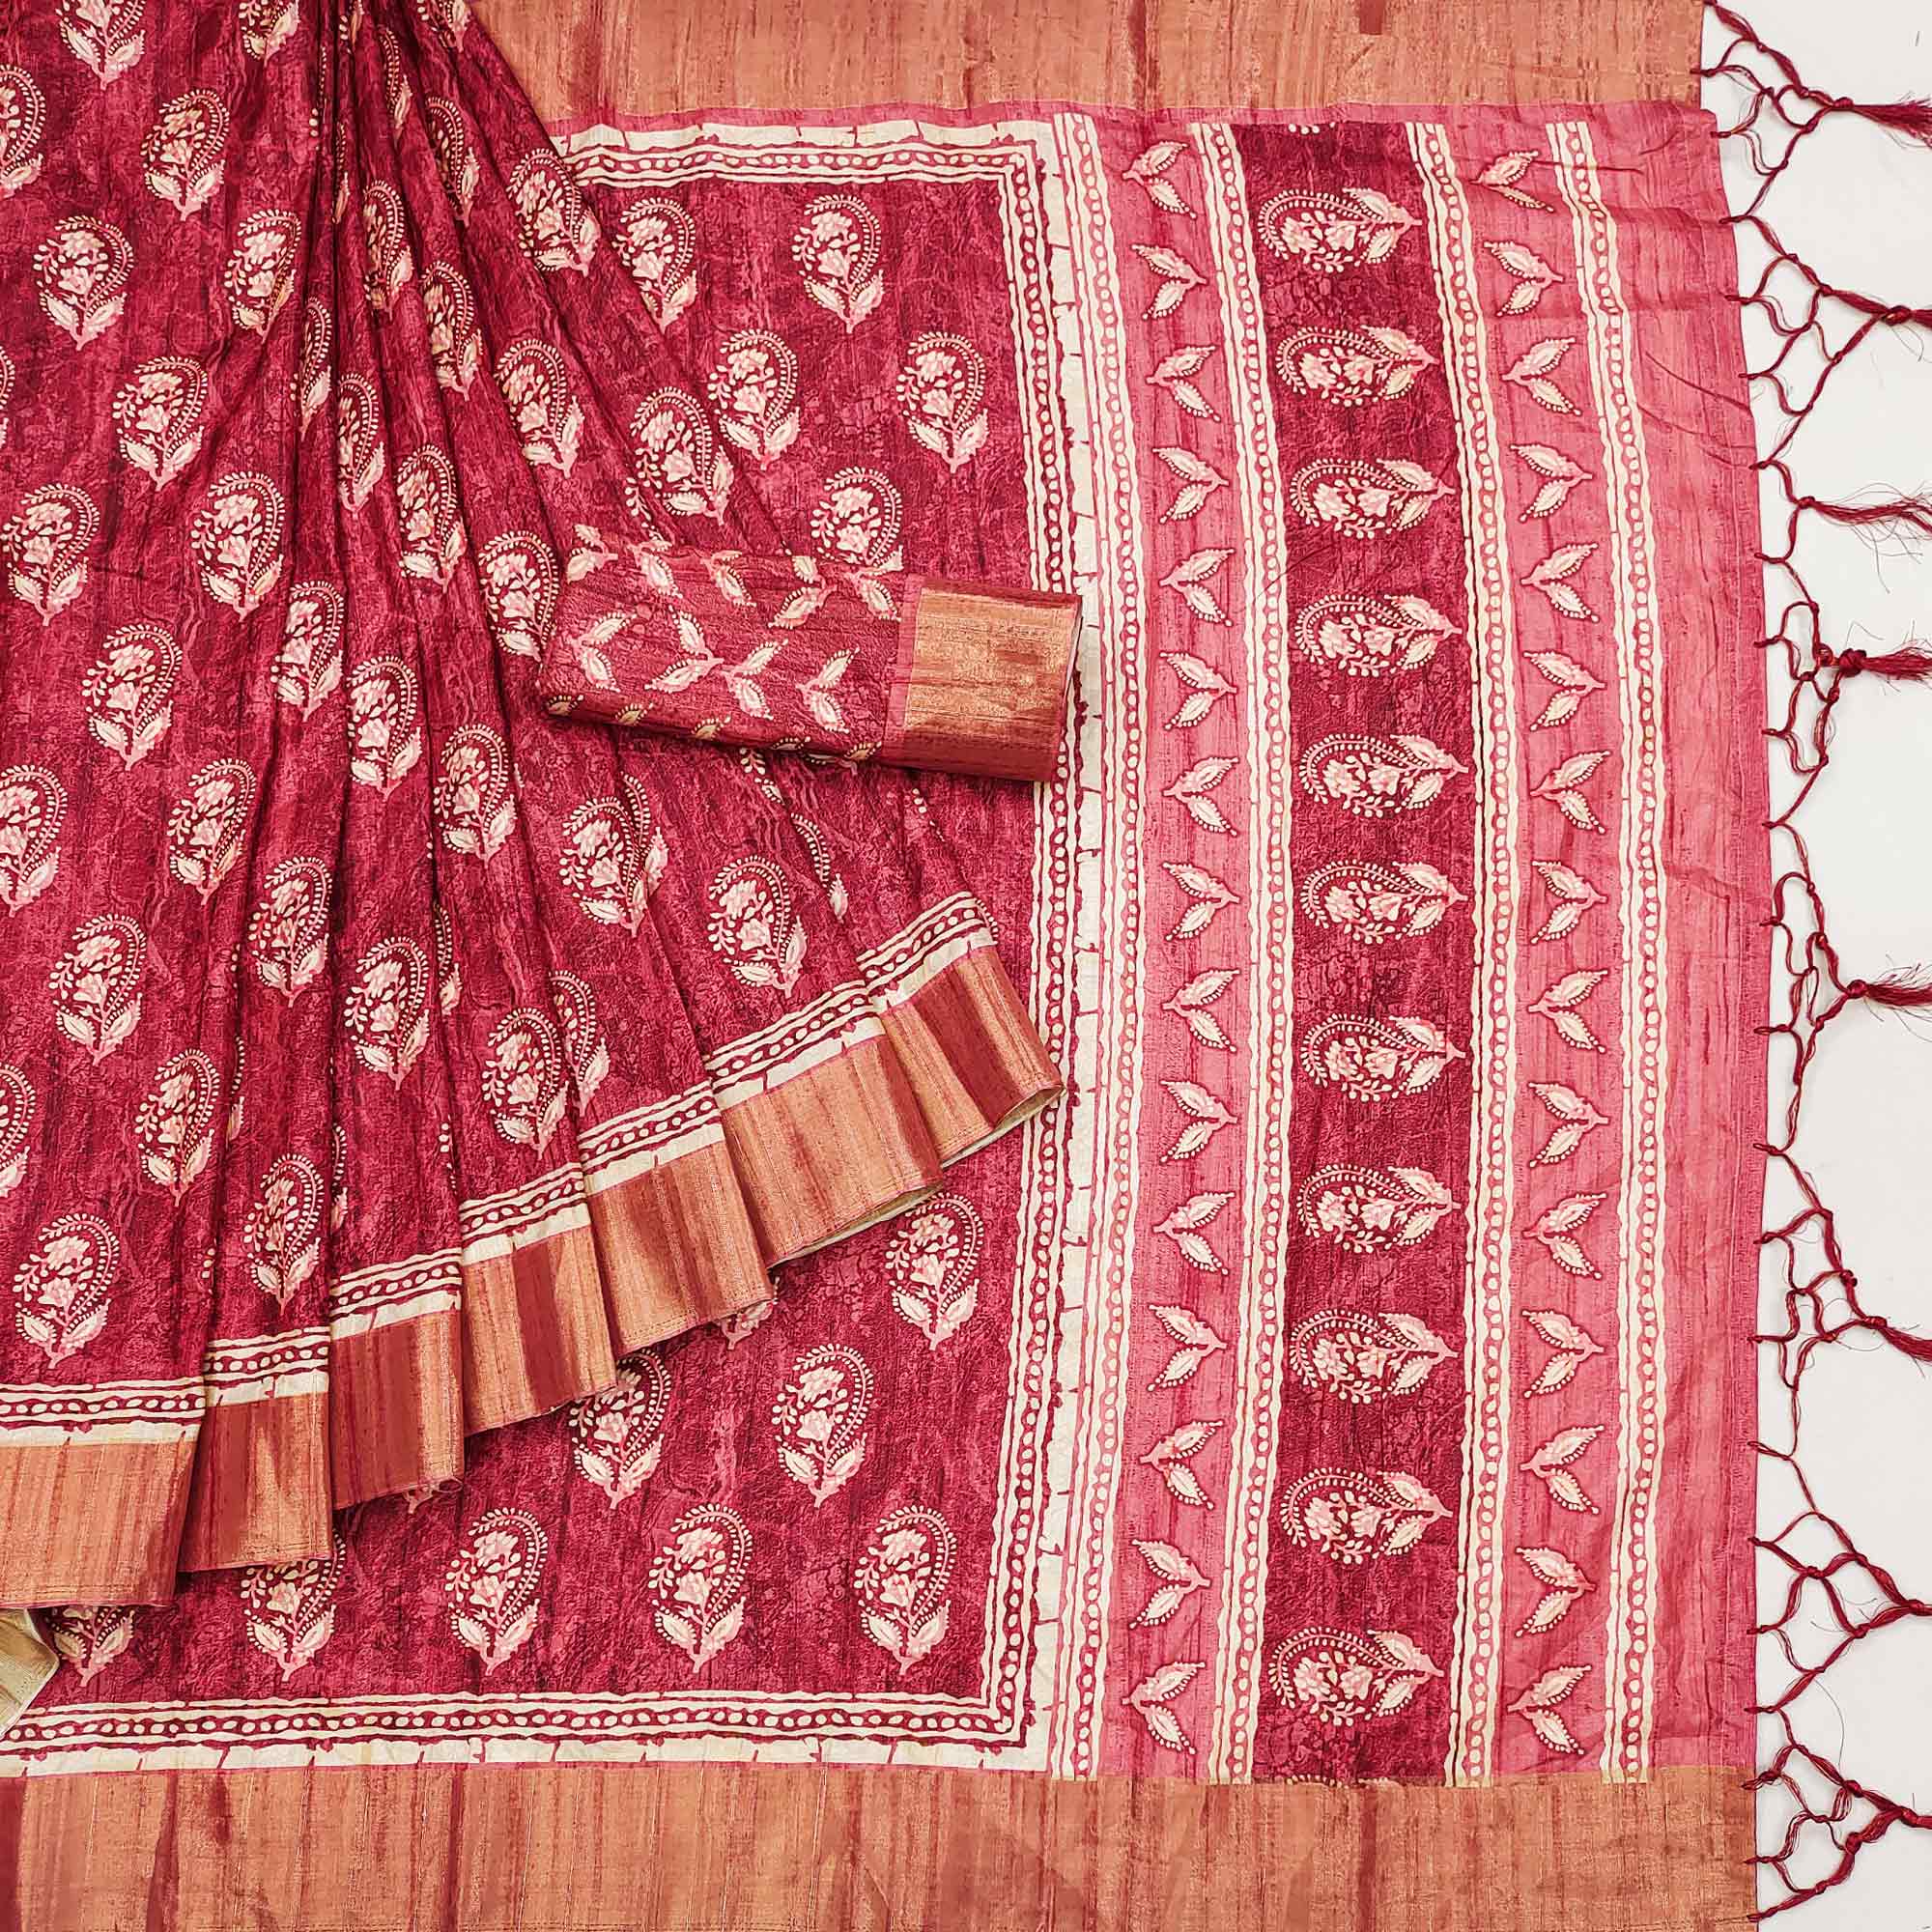 Pink Floral Printed Matka Tussar Saree With Tassels